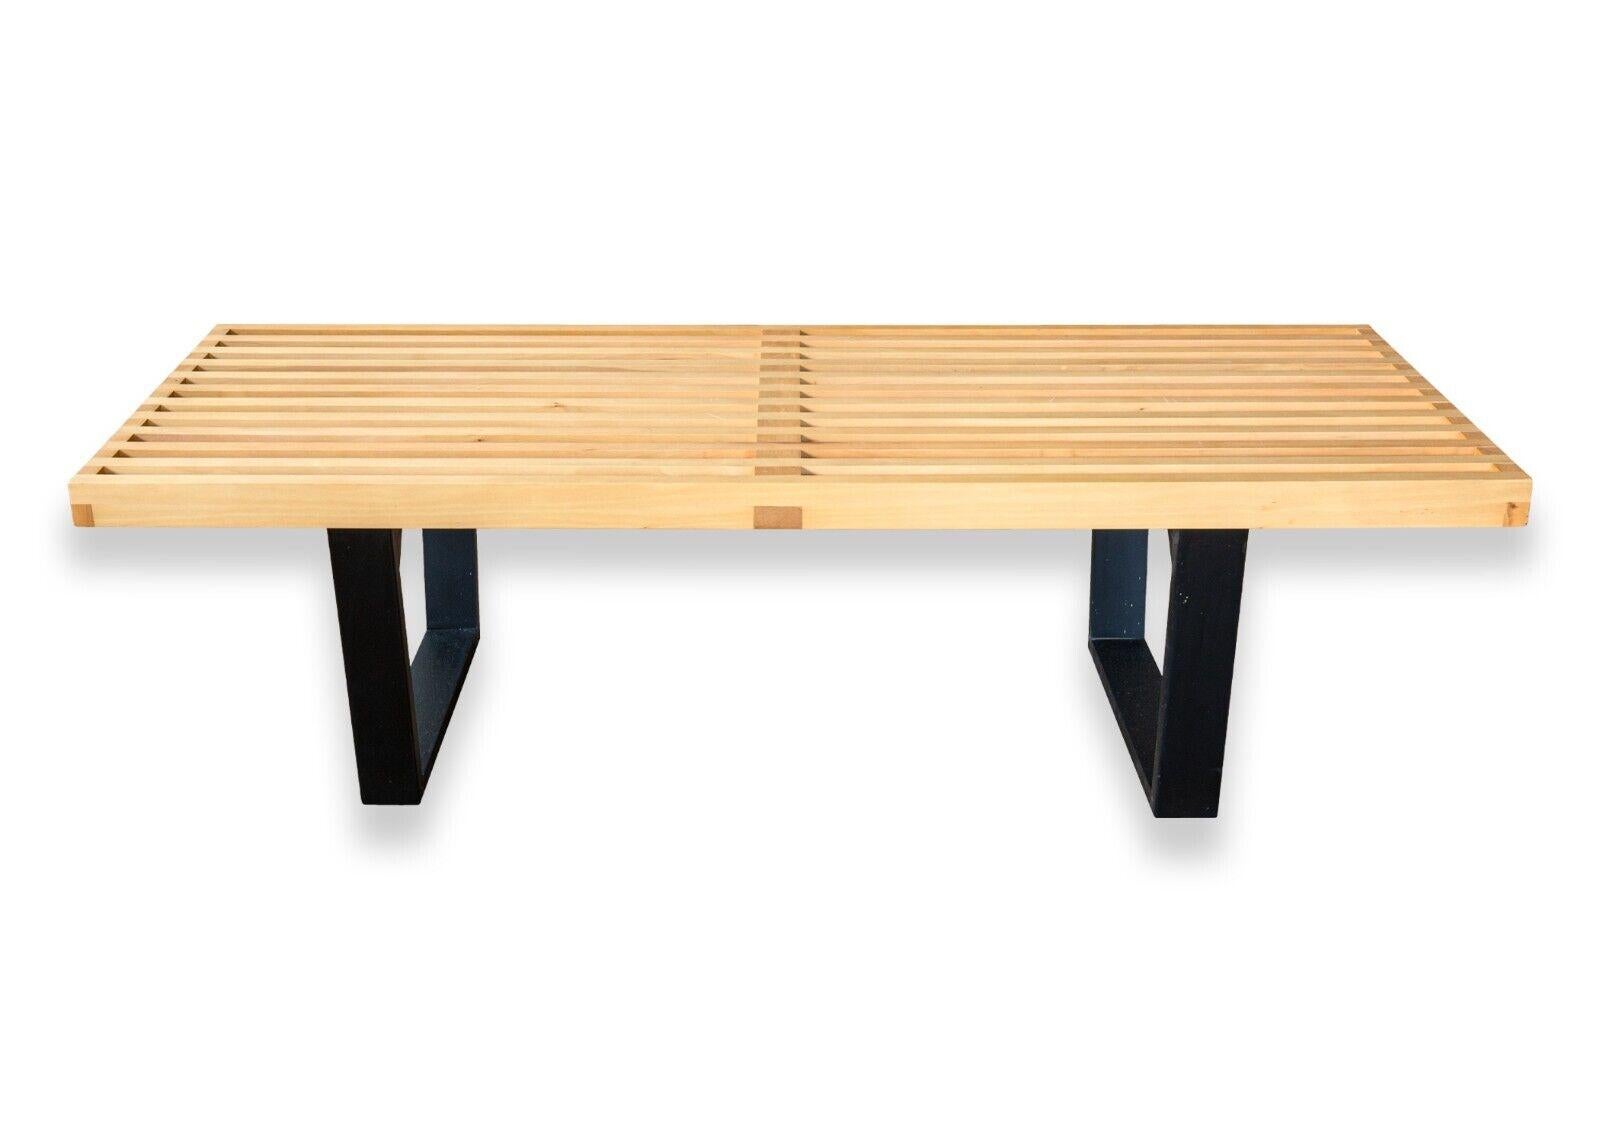 A mid century modern George Nelson for Herman Miller DWR slat bench. This is a gorgeous bench with fantastically simple design by George Nelson for Herman Miller. This bench features an all wood construction, a slatted maple wood seat, and two black